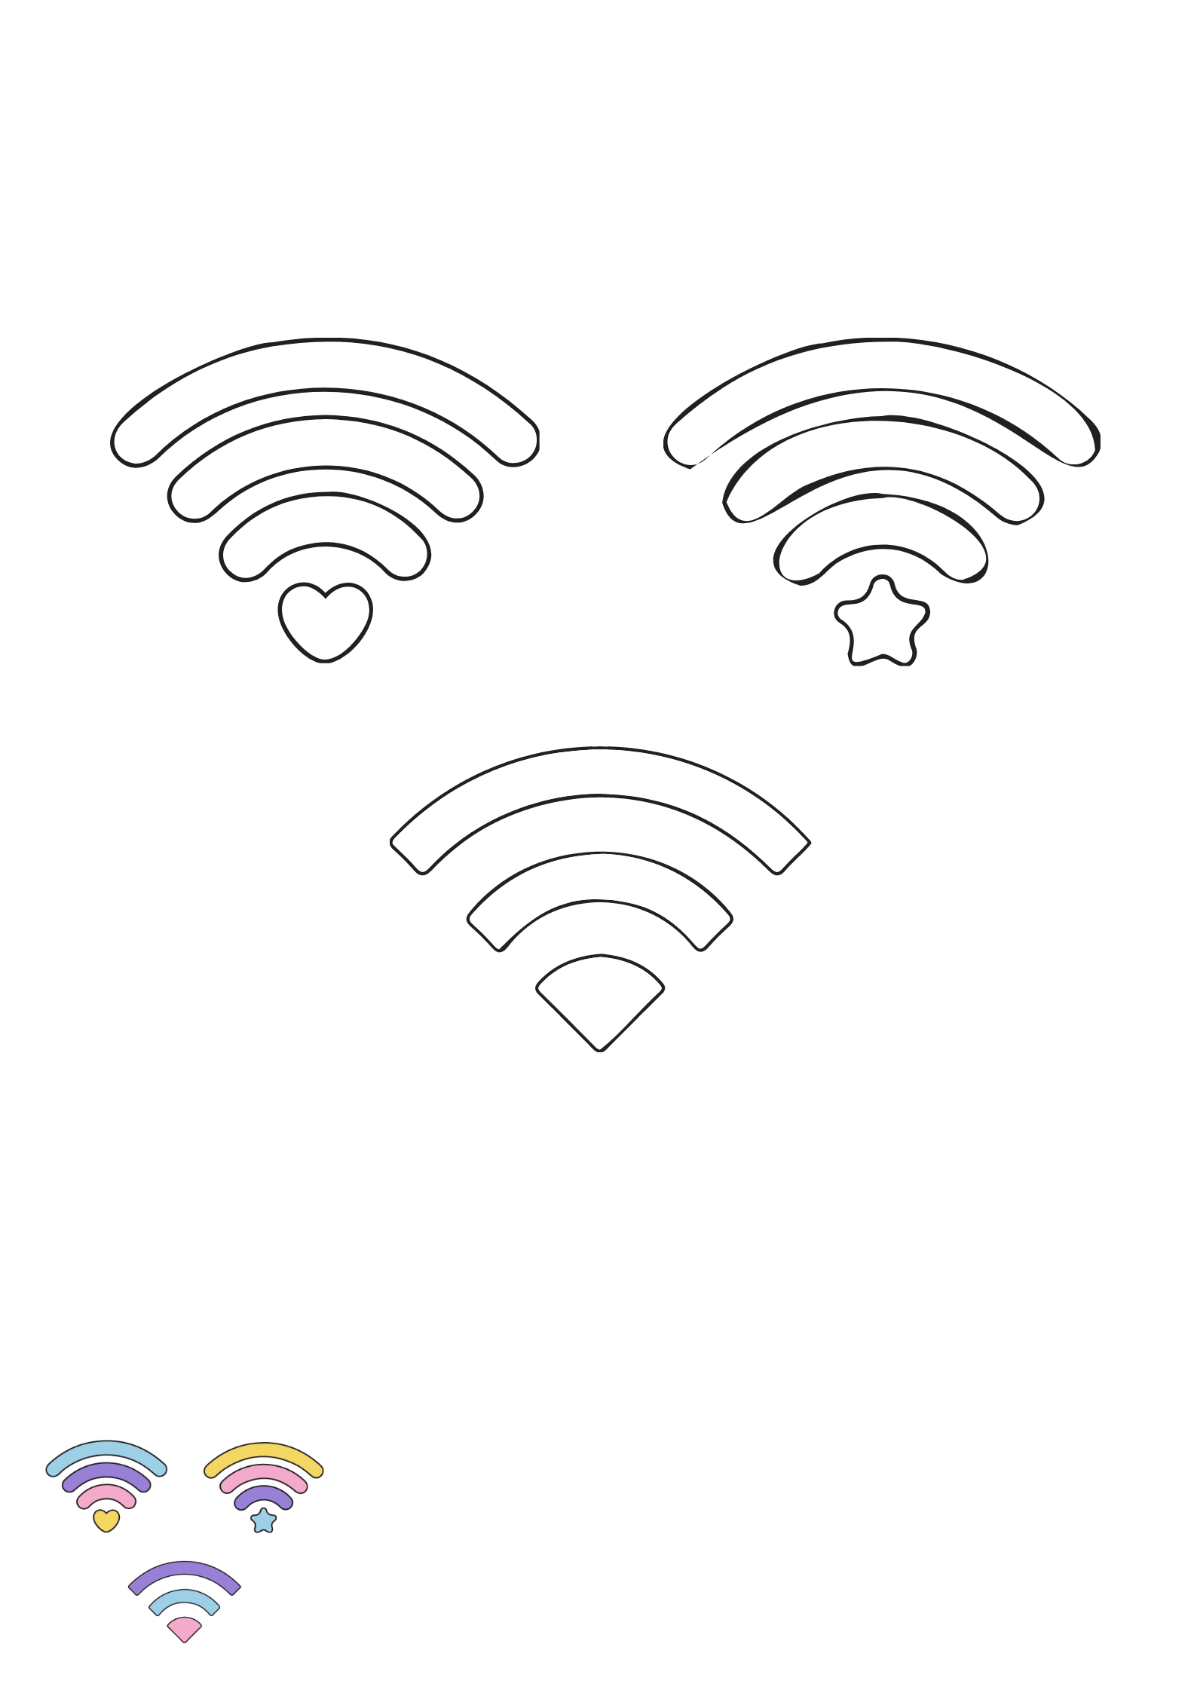 Cute Wifi Symbol coloring page